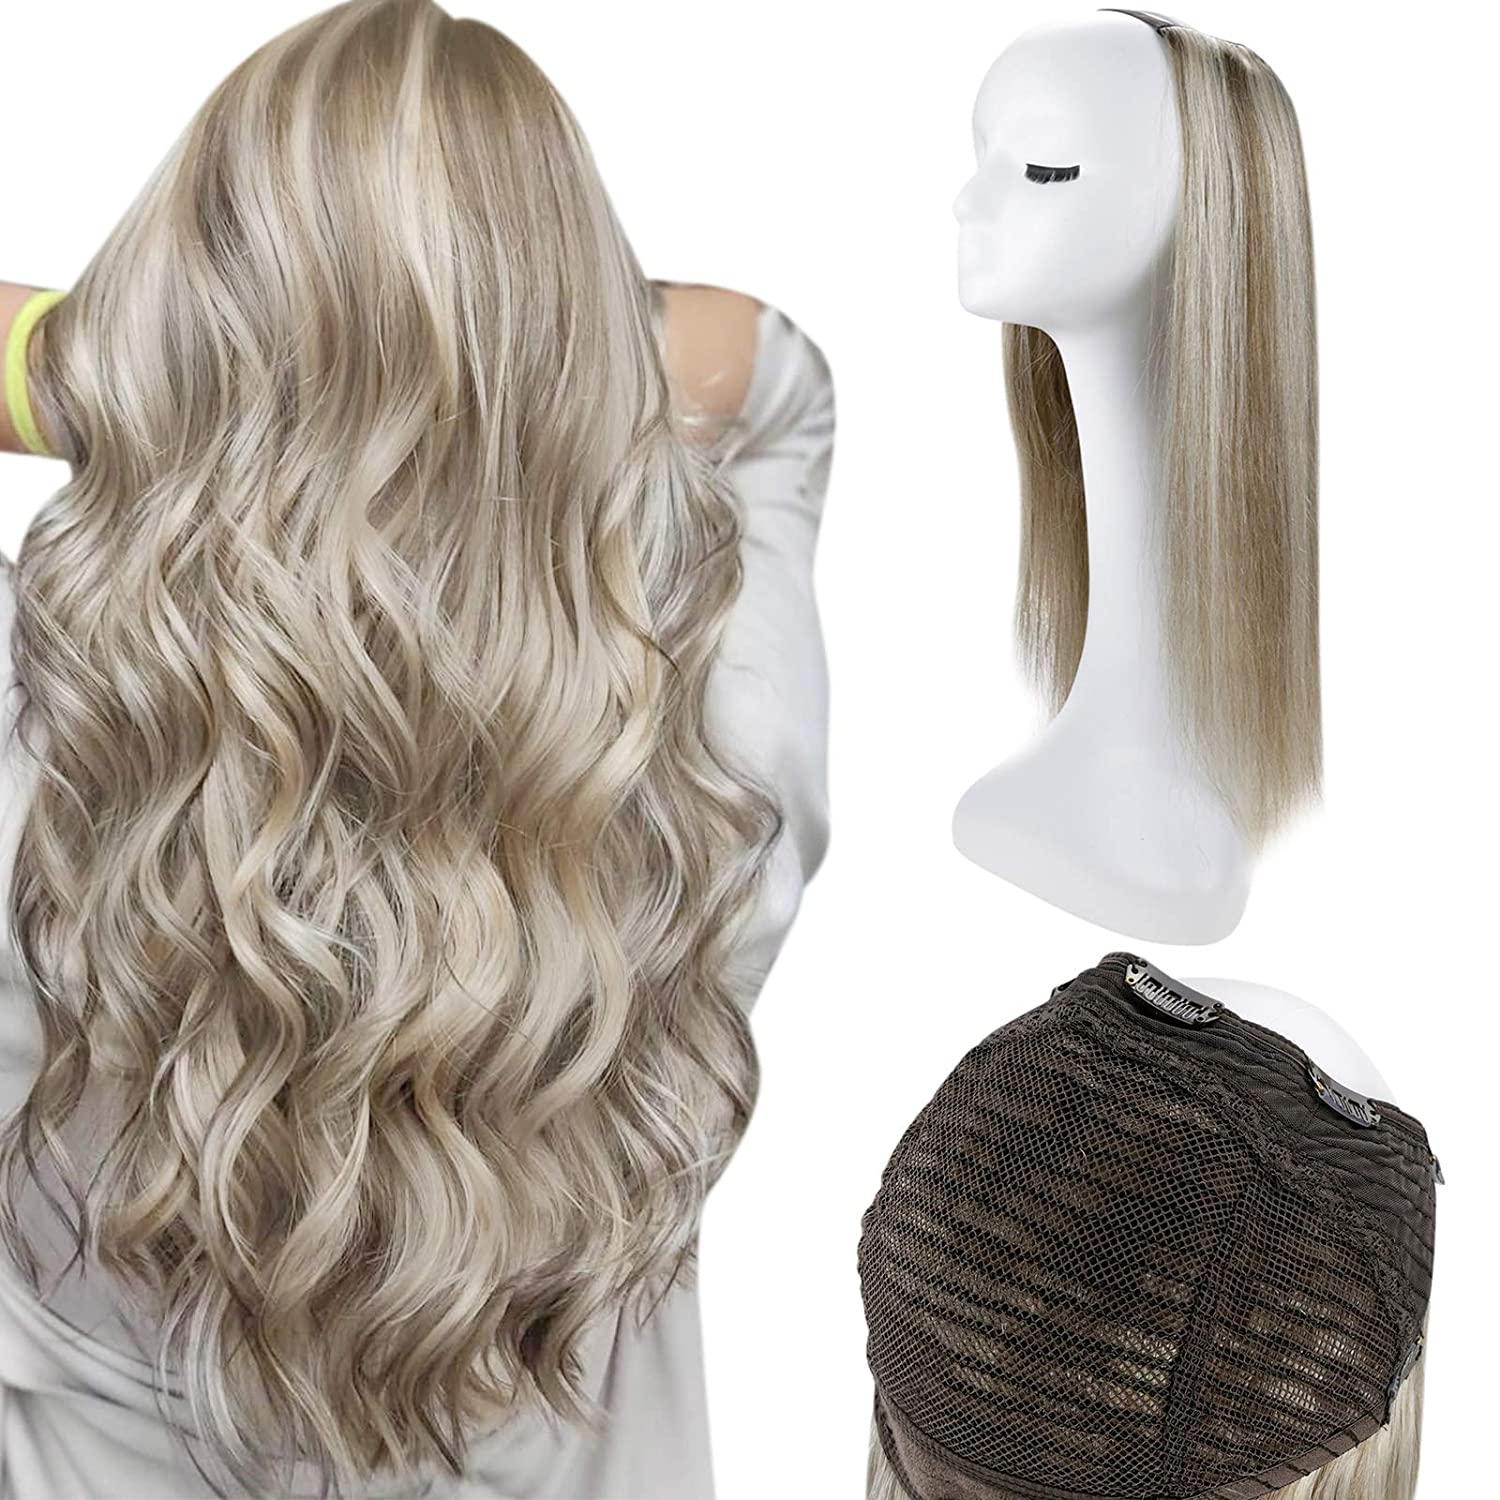 U Part Wig Real Hair Clip In Full Head One Piece Straight Extensions Remy One Piece Hair Extensions #8 Ash Brown Highlighted With Color #60 White Blonde - FShine Shop